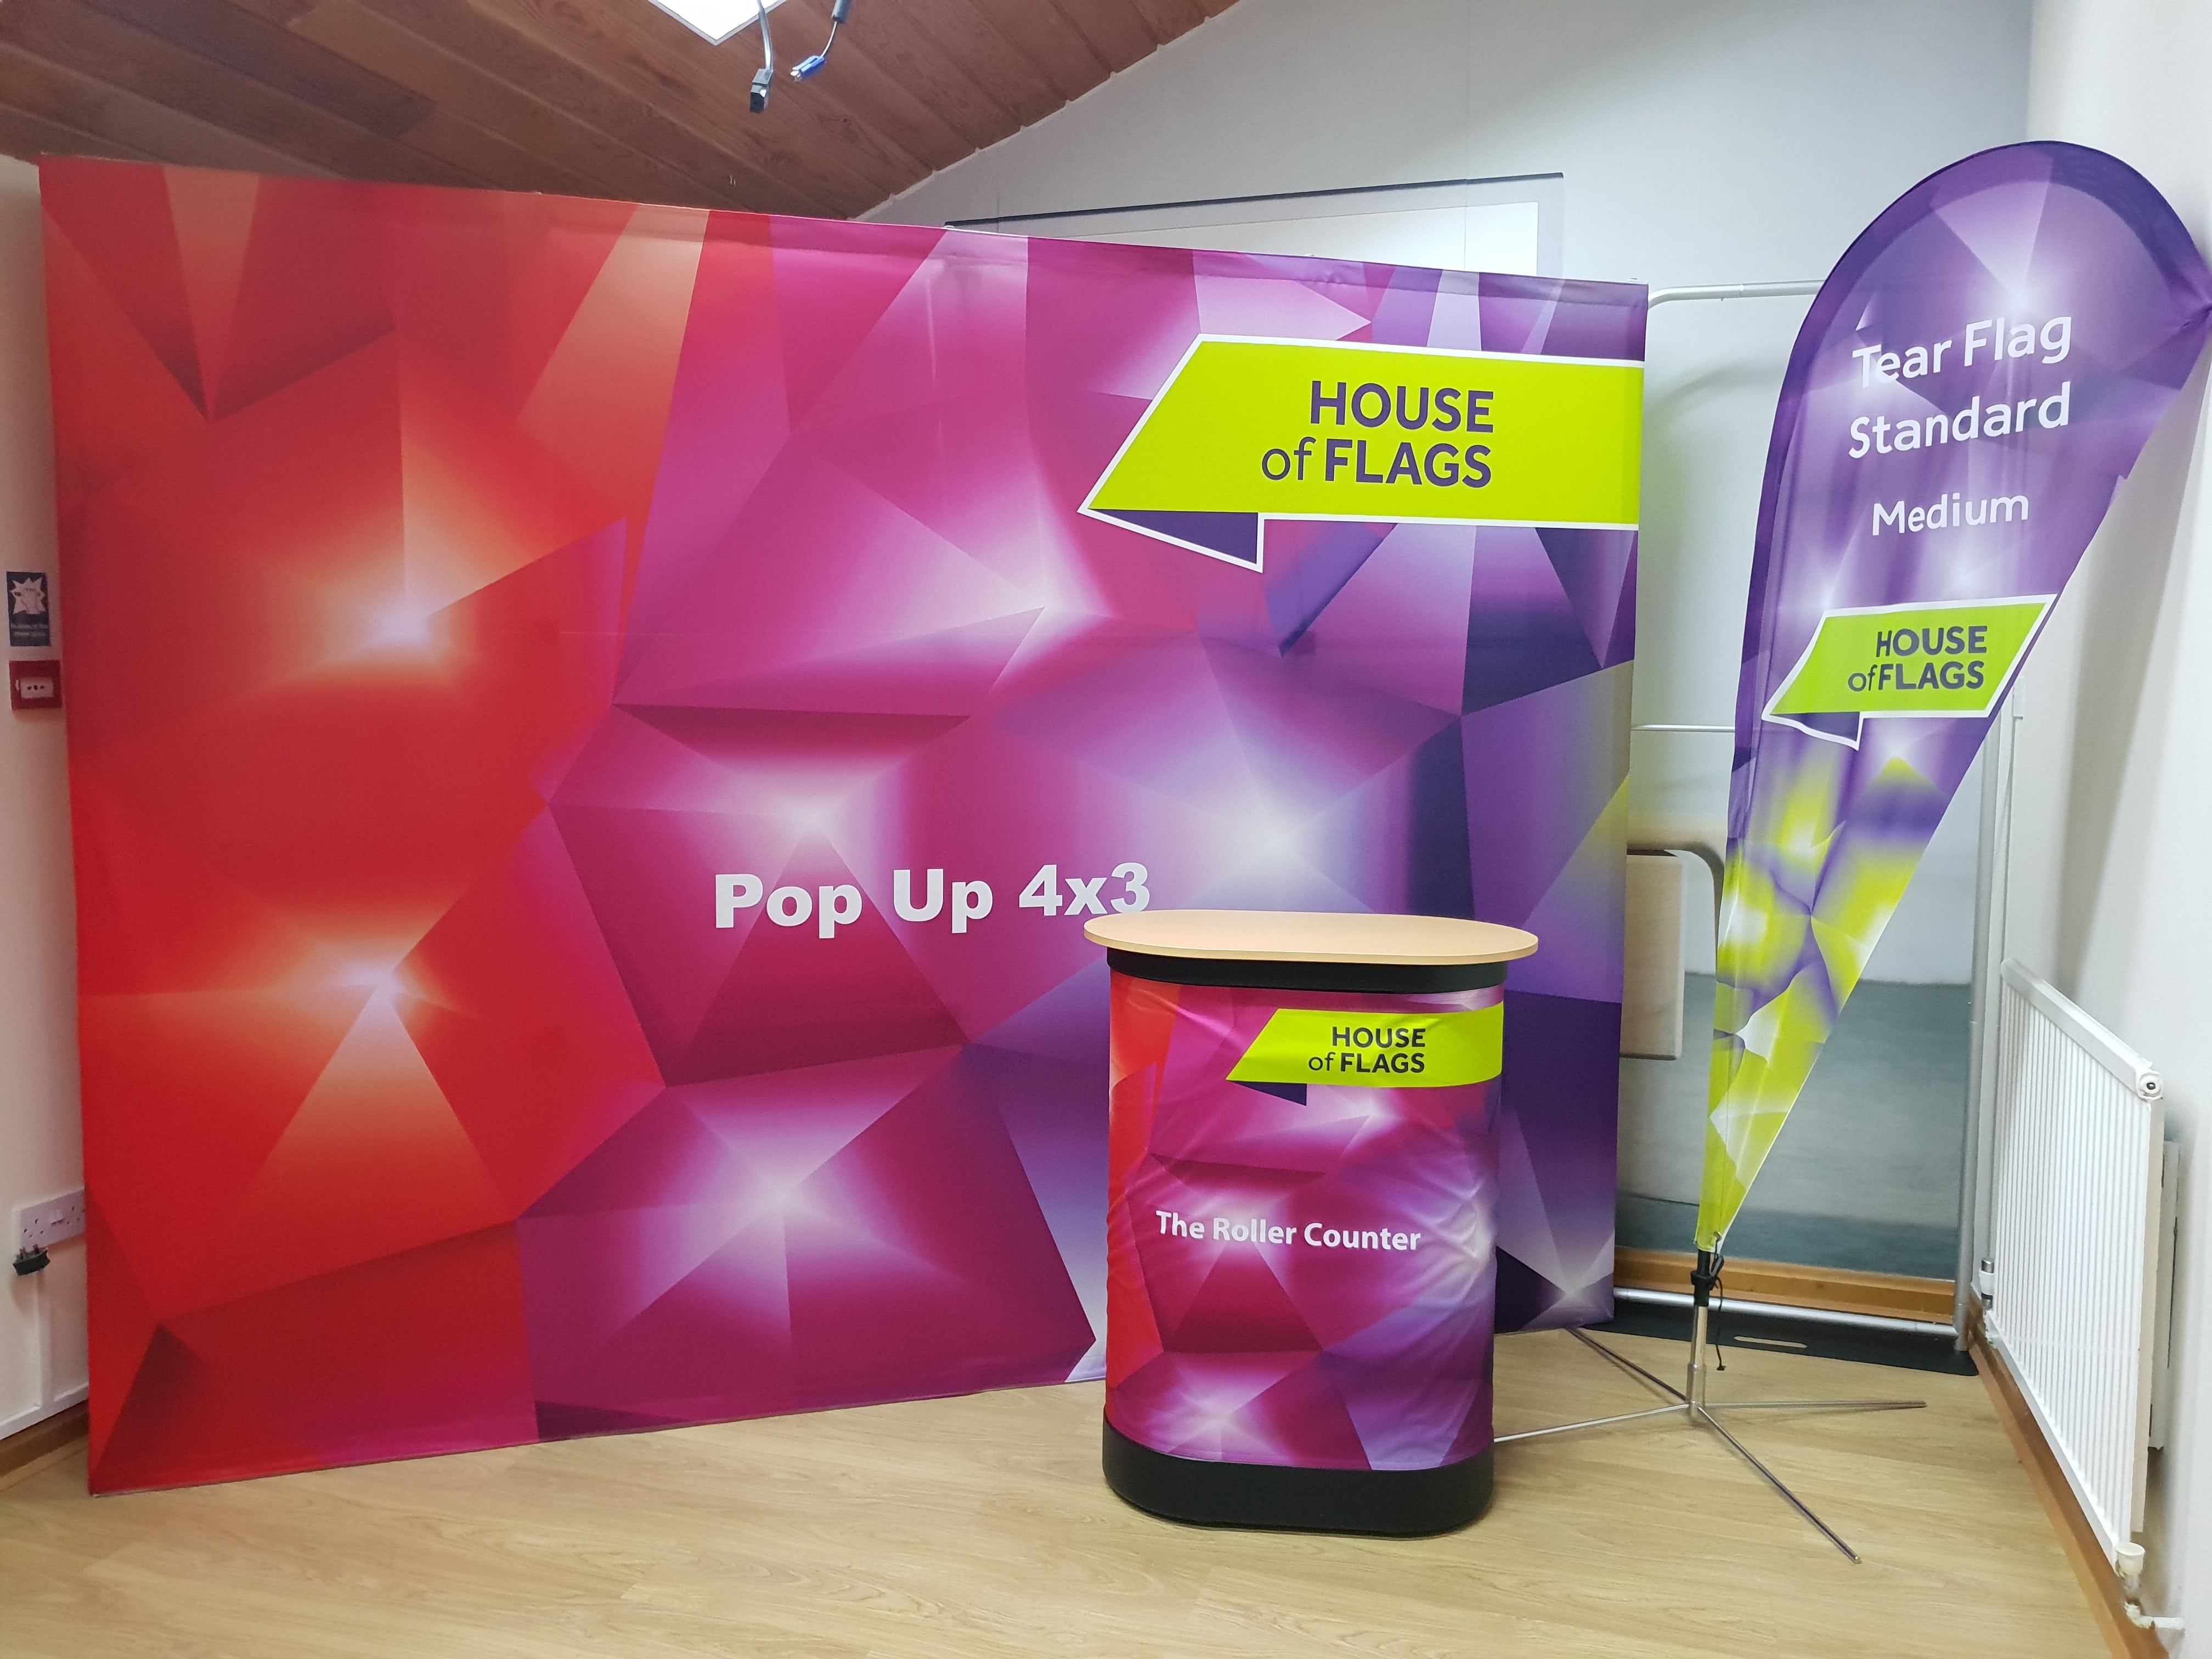 New product launch ideas, House of Flags pop up stand, roller counter, and teardrop flag.